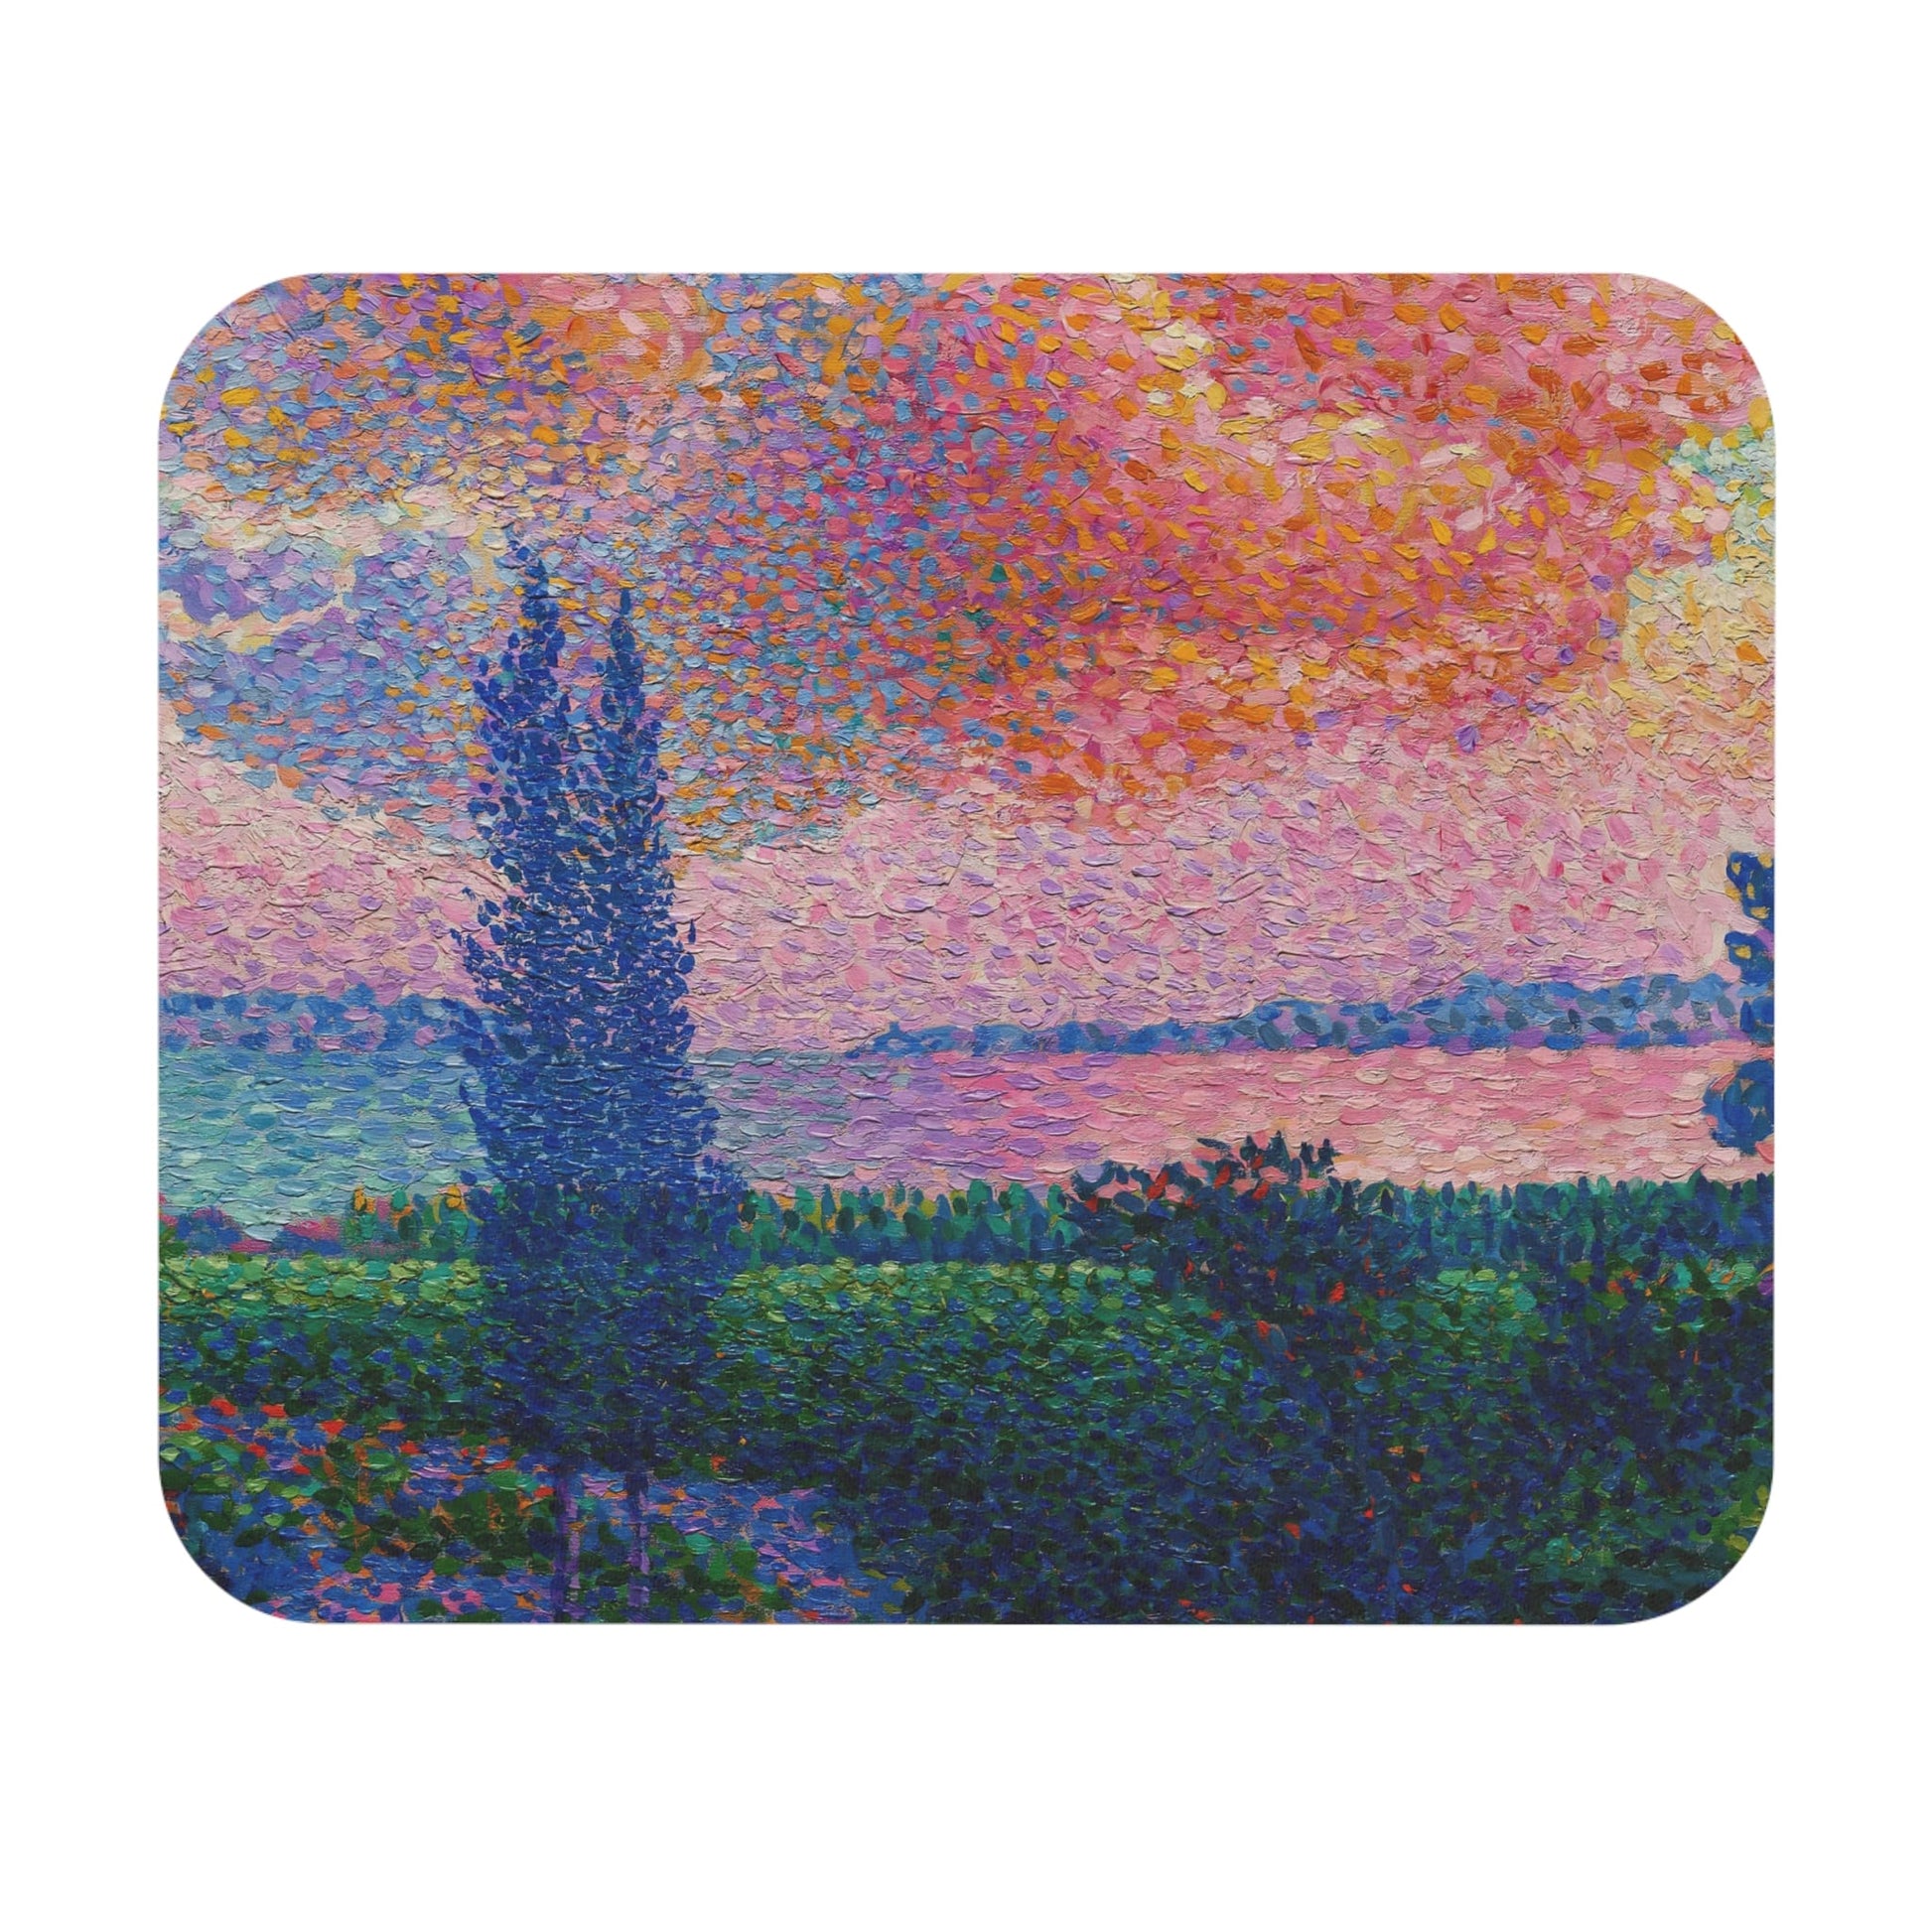 Pink Clouds Mouse Pad showcasing a dreamy landscape theme, ideal for desk and office decor.